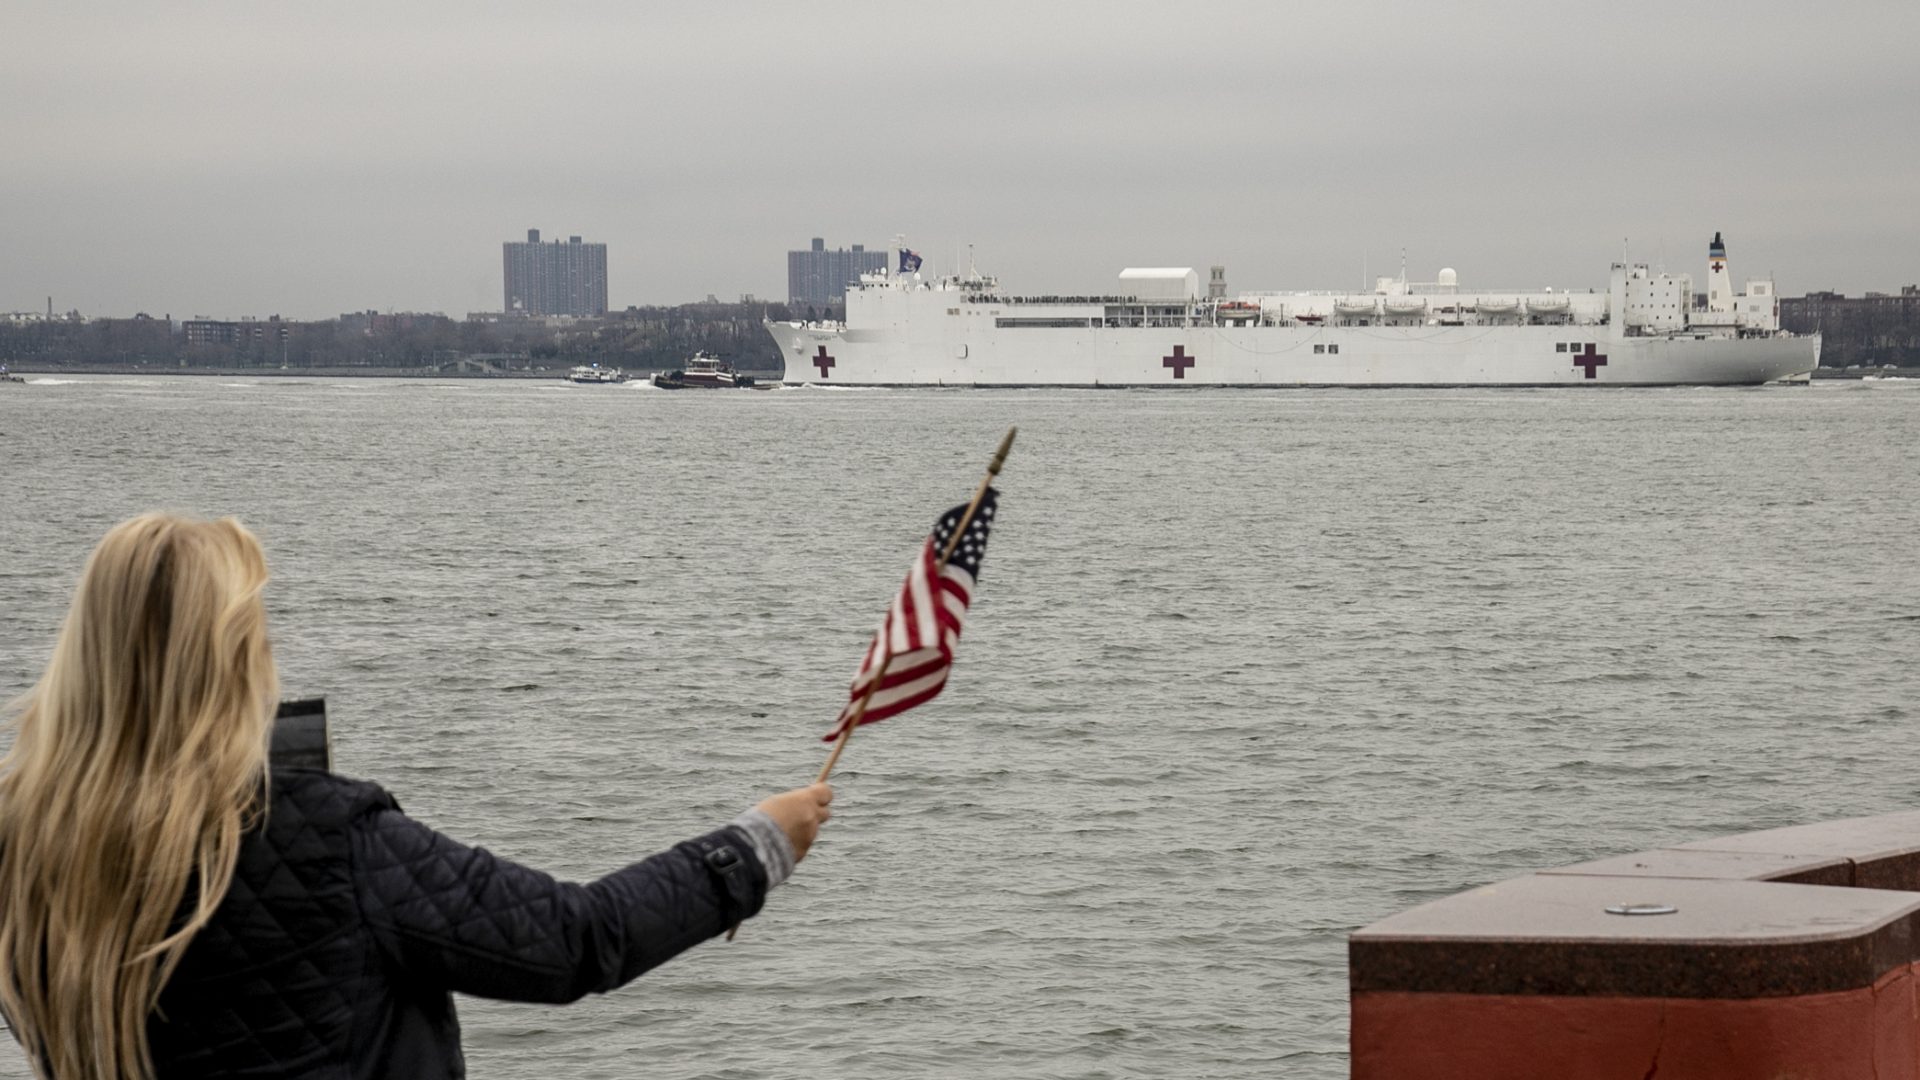 The U.S. Navy hospital ship Comfort is welcomed to New York City by Charlene Nickloan, waving a flag from the Matthew Buono war memorial in Staten Island, N.Y., on Monday.